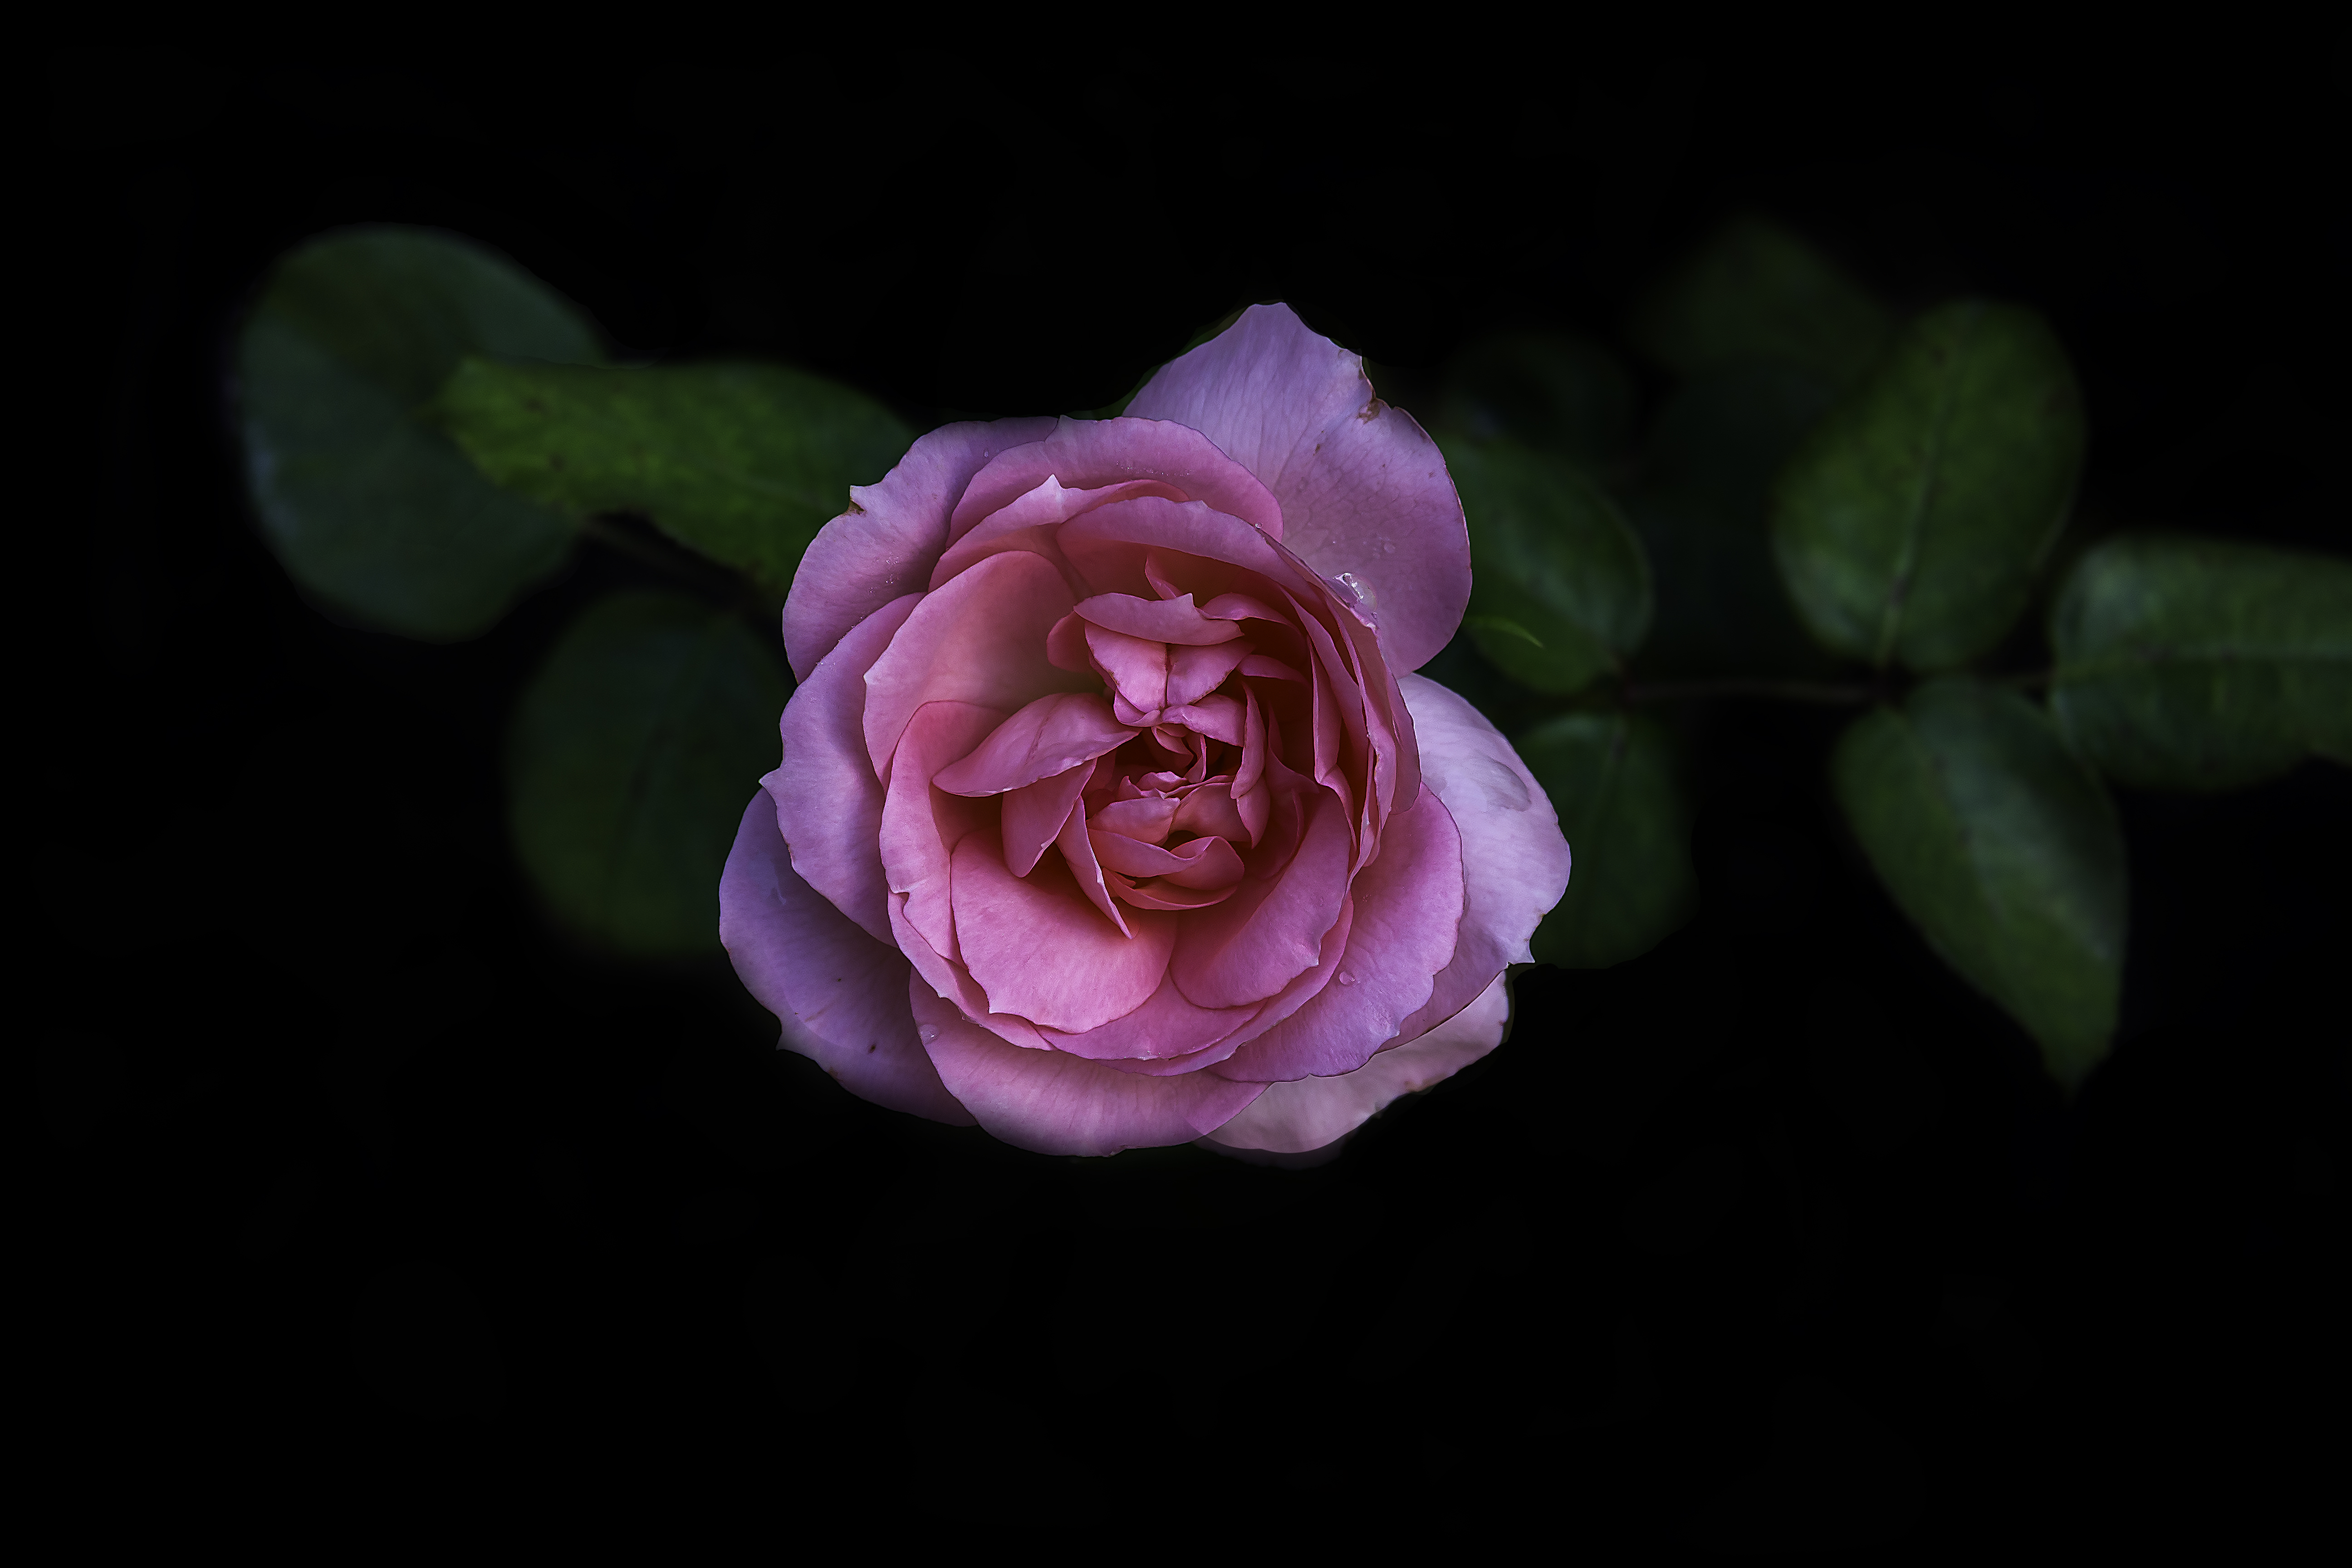 Photos of roses, flowers